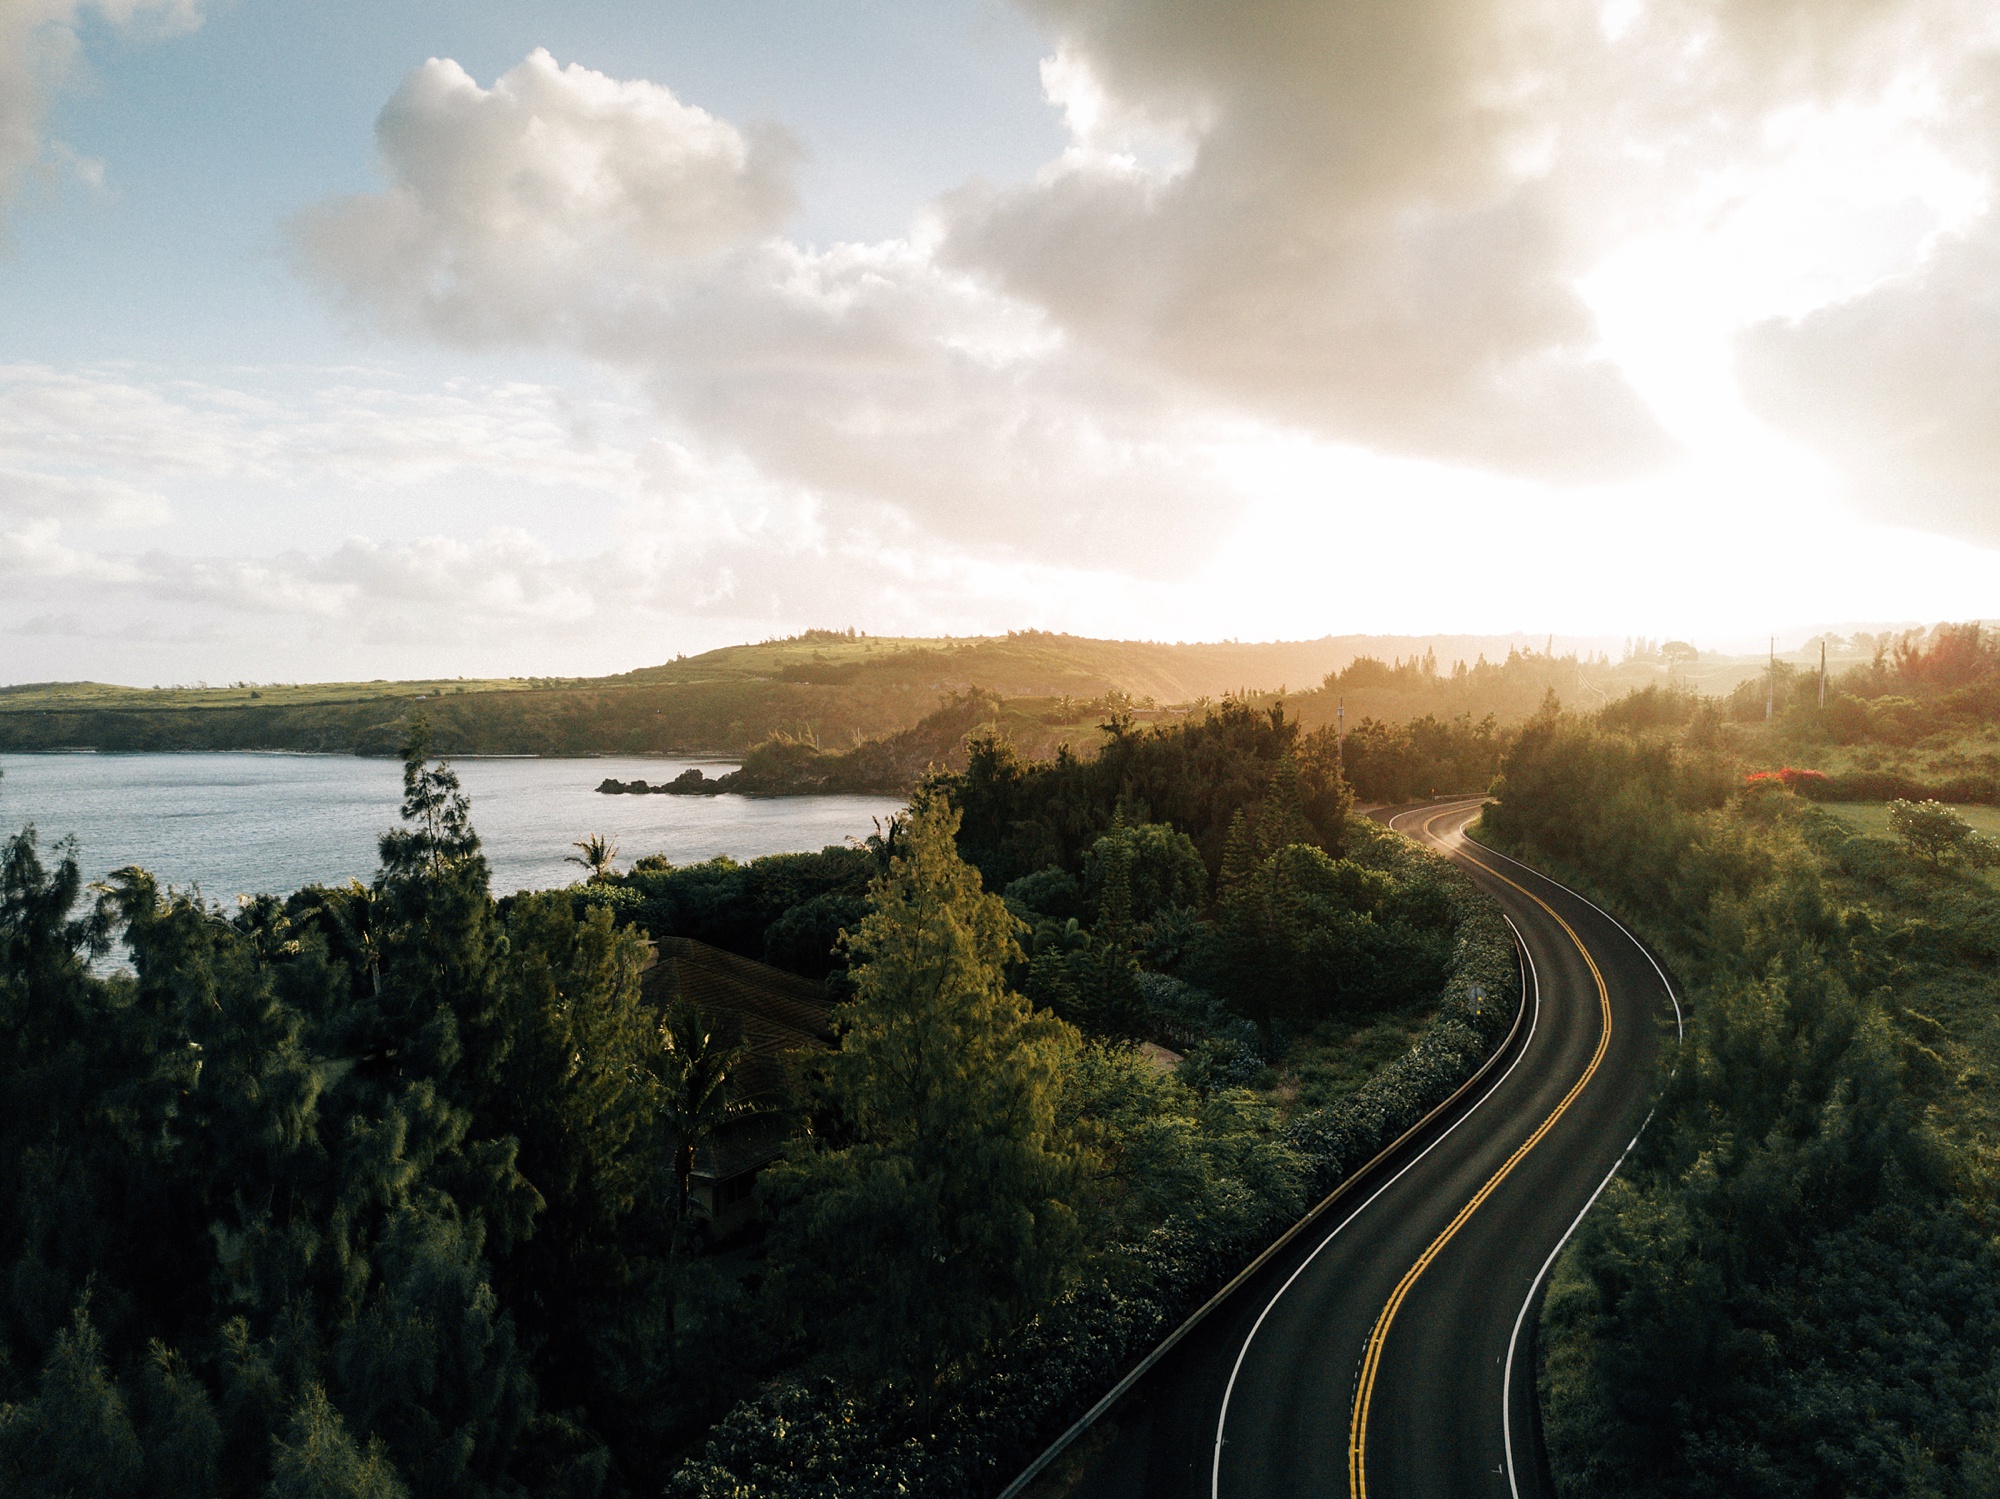 MAUI brilliantly captured in photos